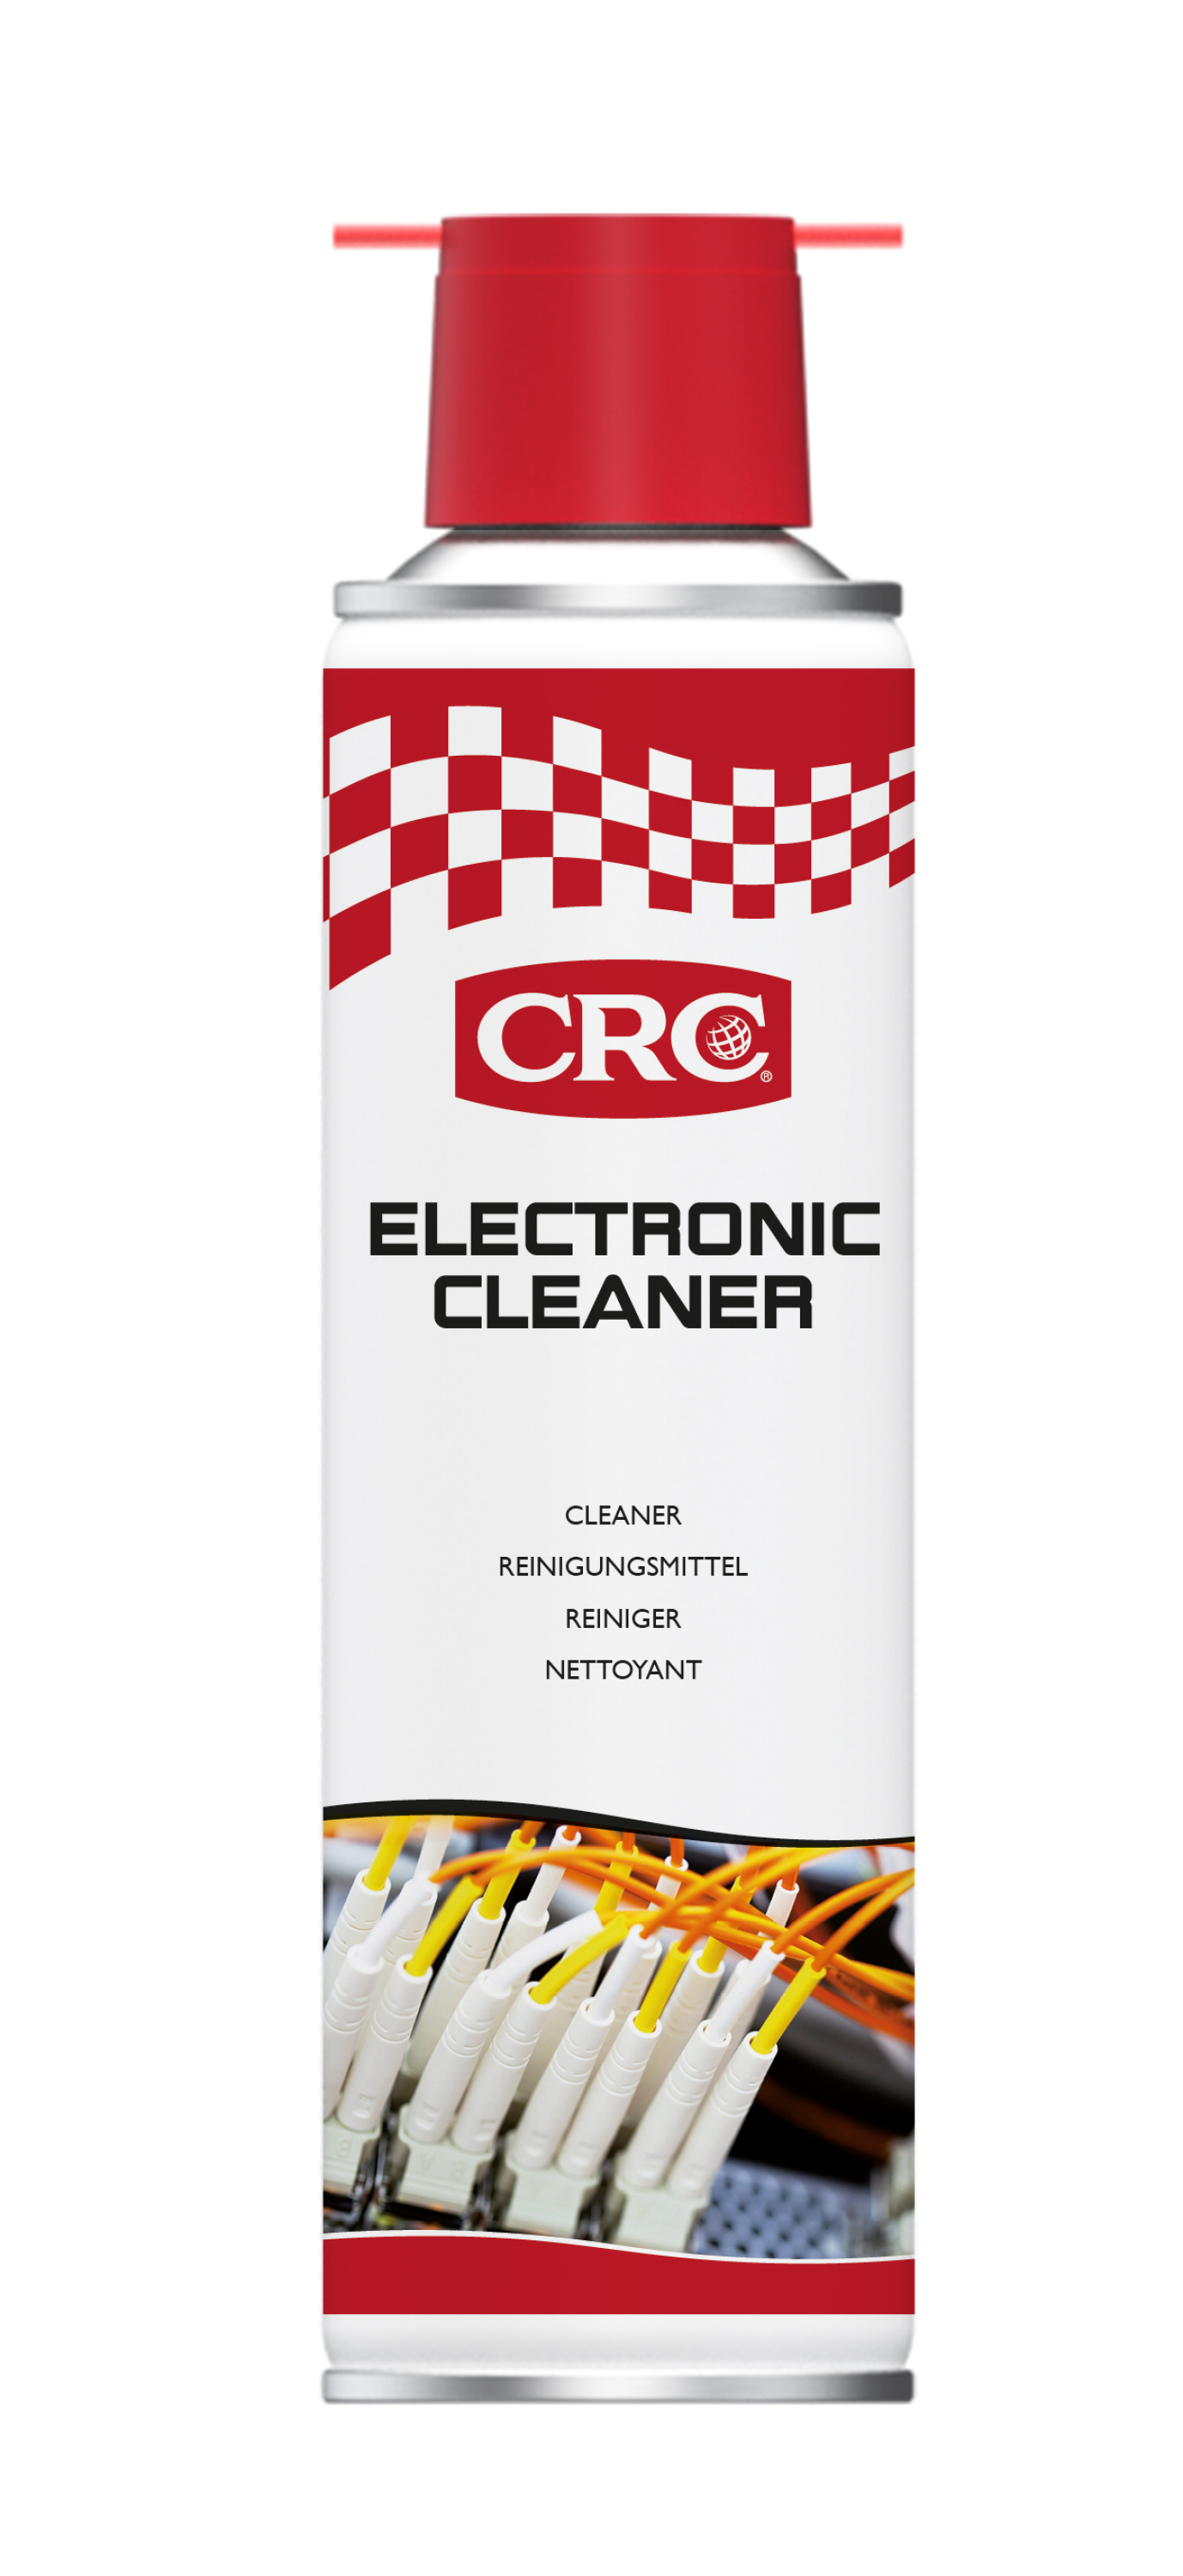 Electronic cleaner crc 250 ml